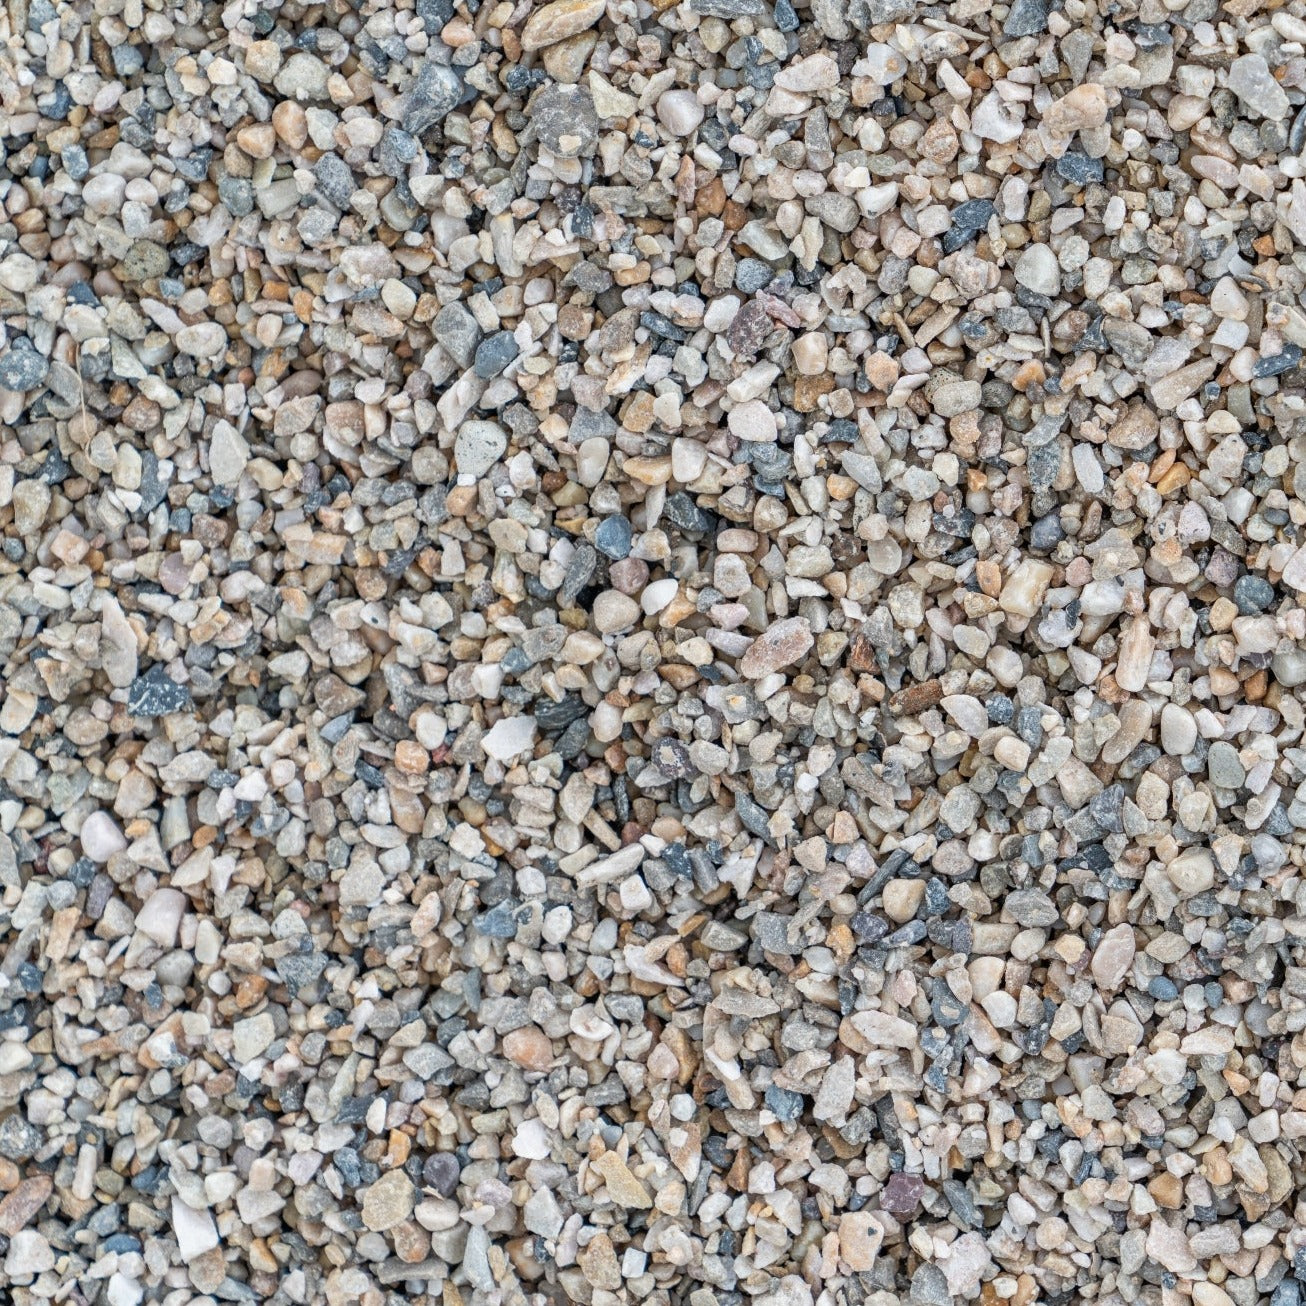 Washed Pea Gravel